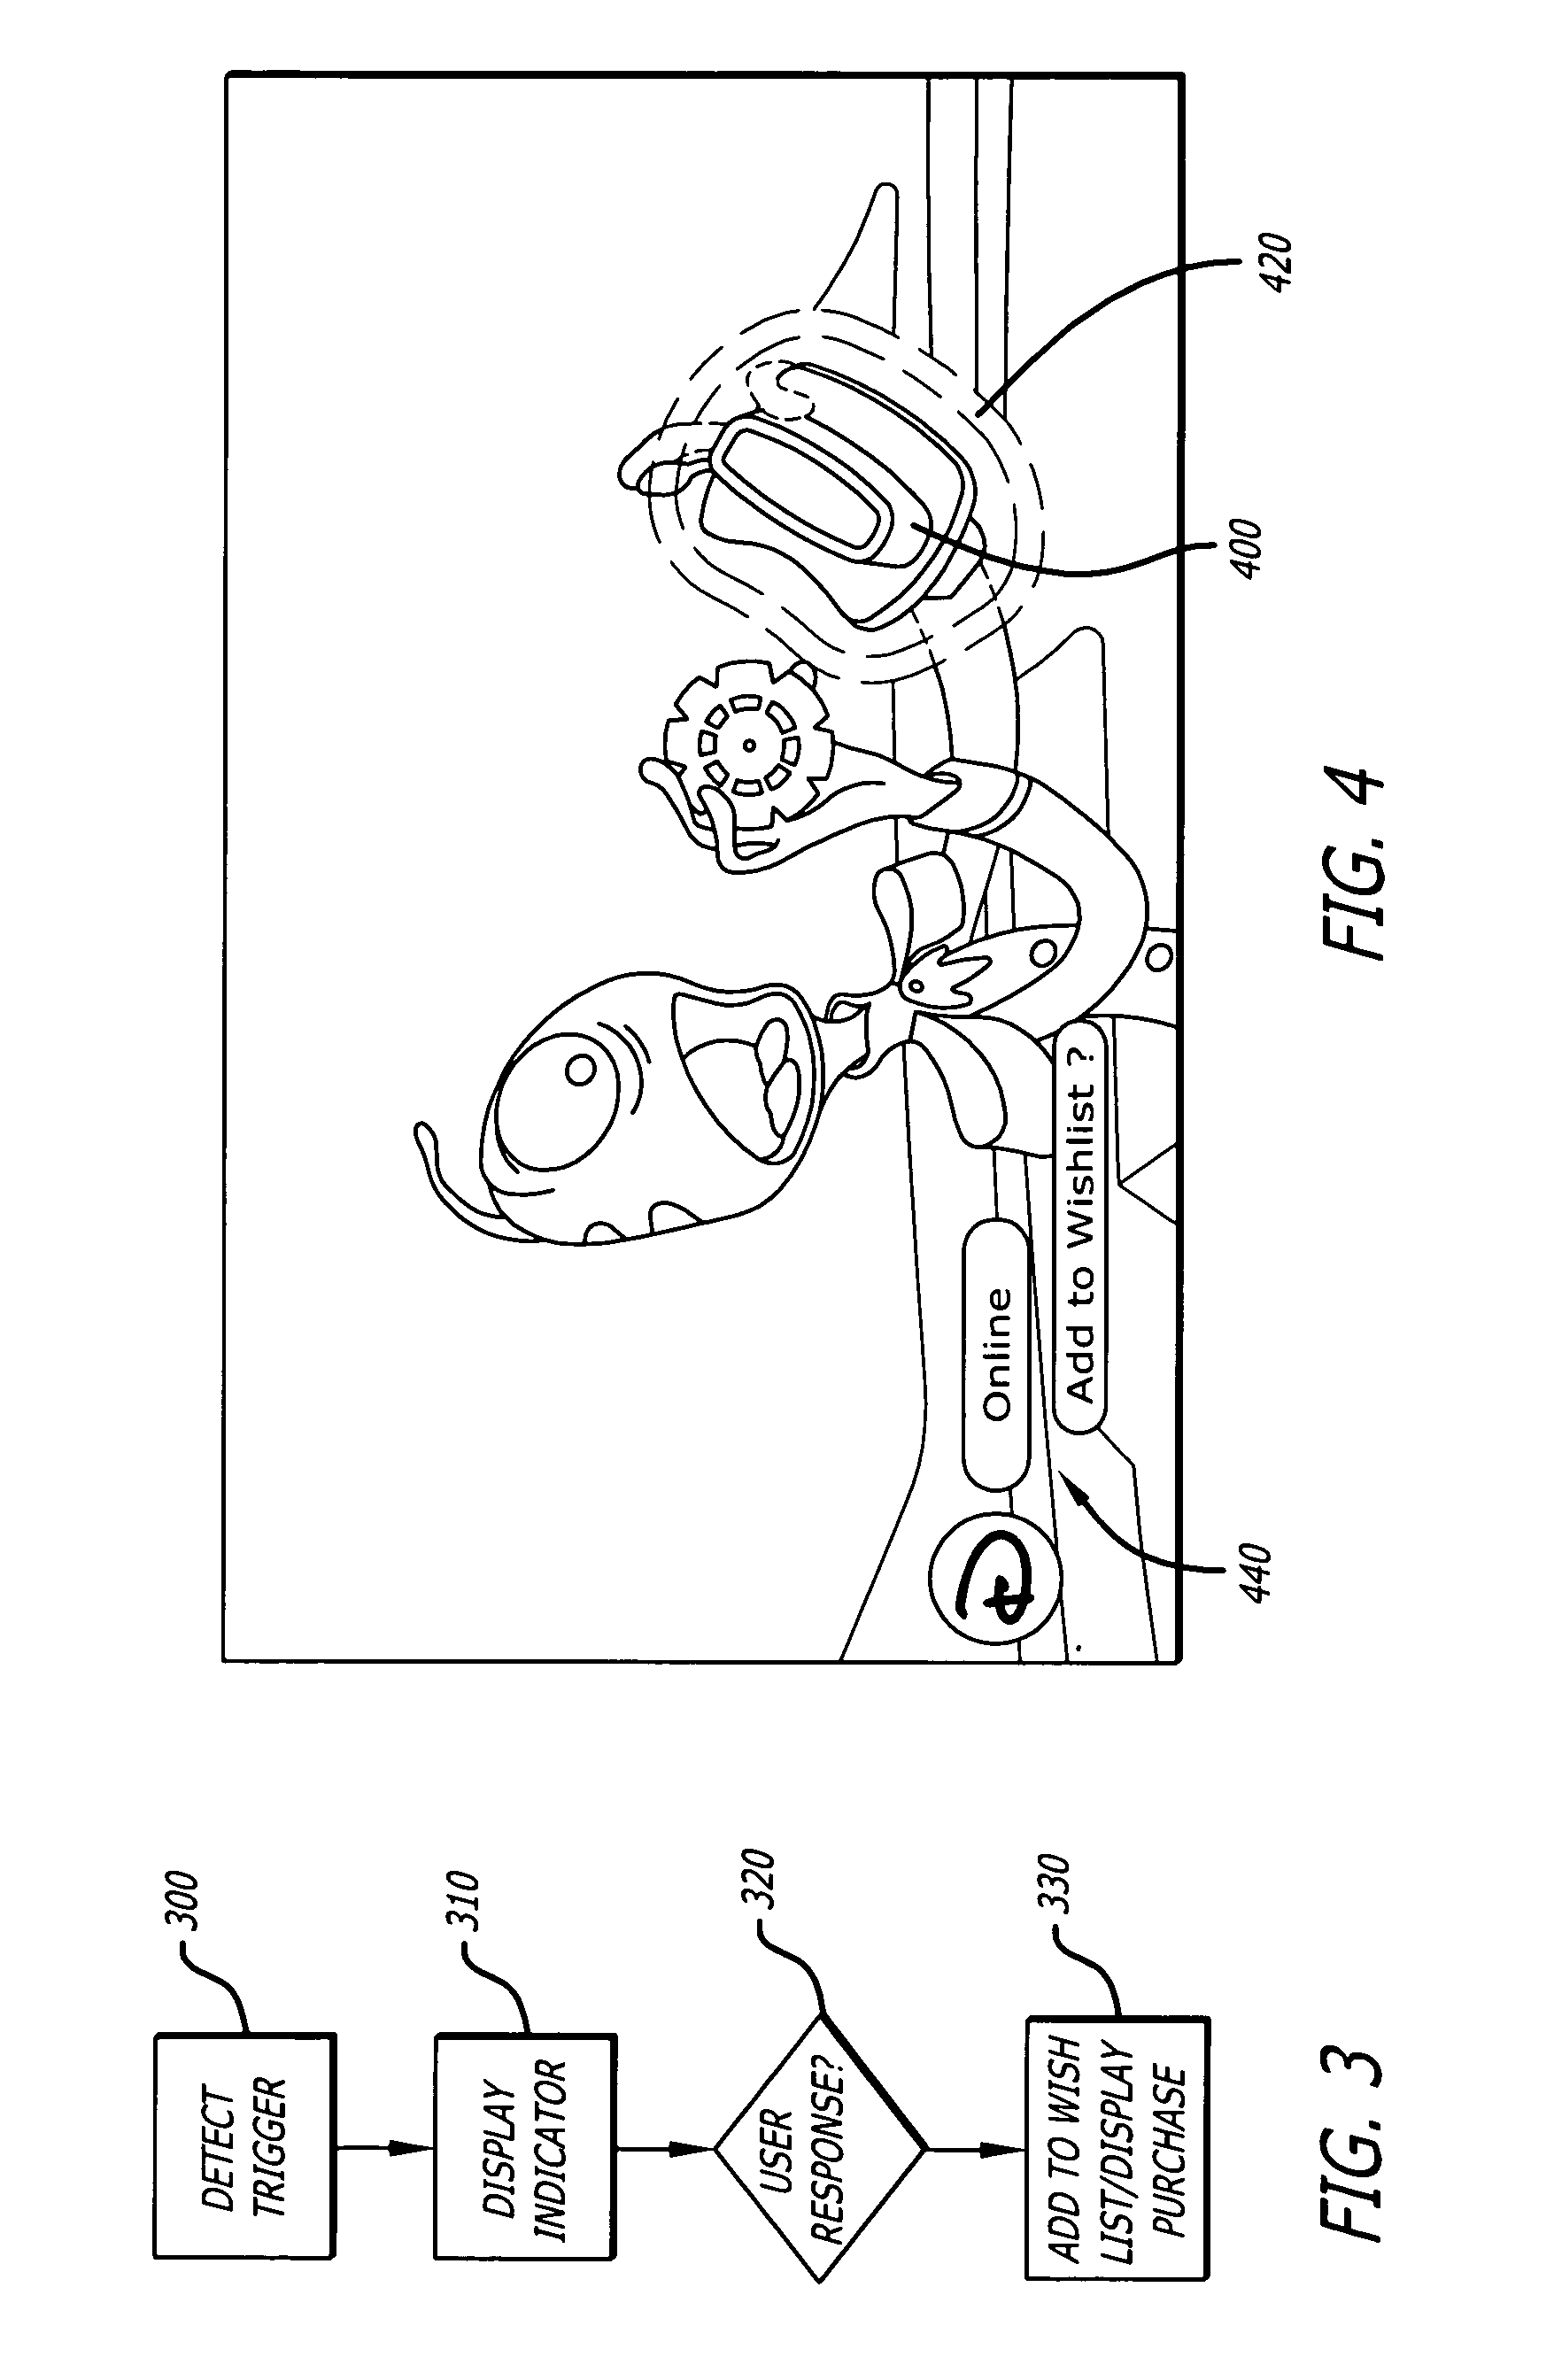 System and method of video player commerce